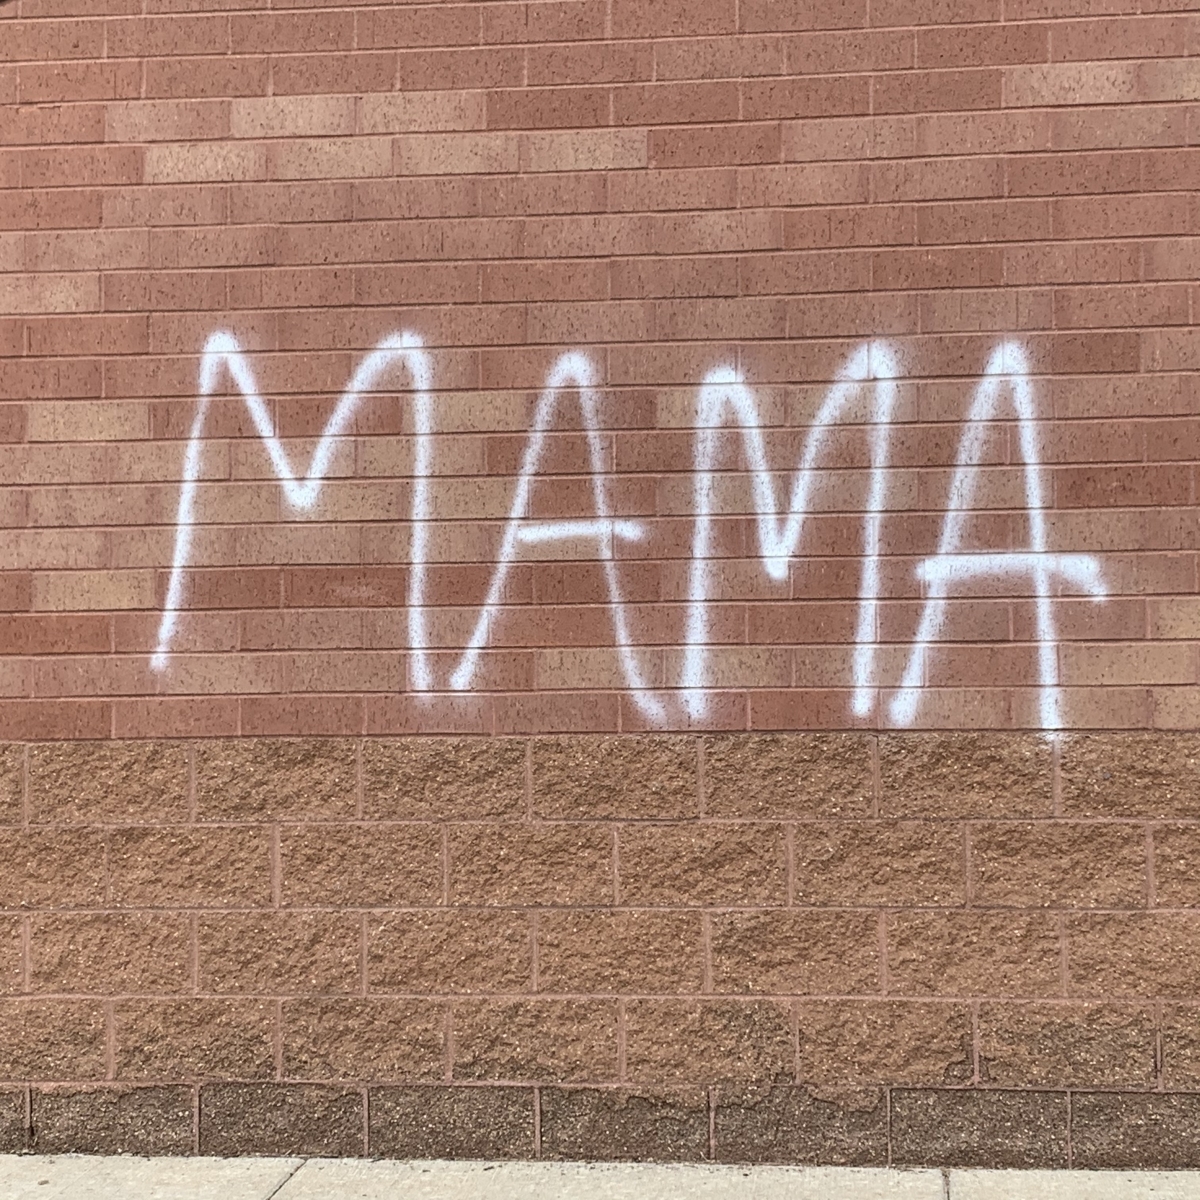 This simple text reading "Mama" was documented on June 2, 2020 on a former Walmart in the Midway neighborhood in Saint Paul, Minnesota. This wall was the epicenter of the uprisings in Saint Paul in response to the murder of George Floyd. 